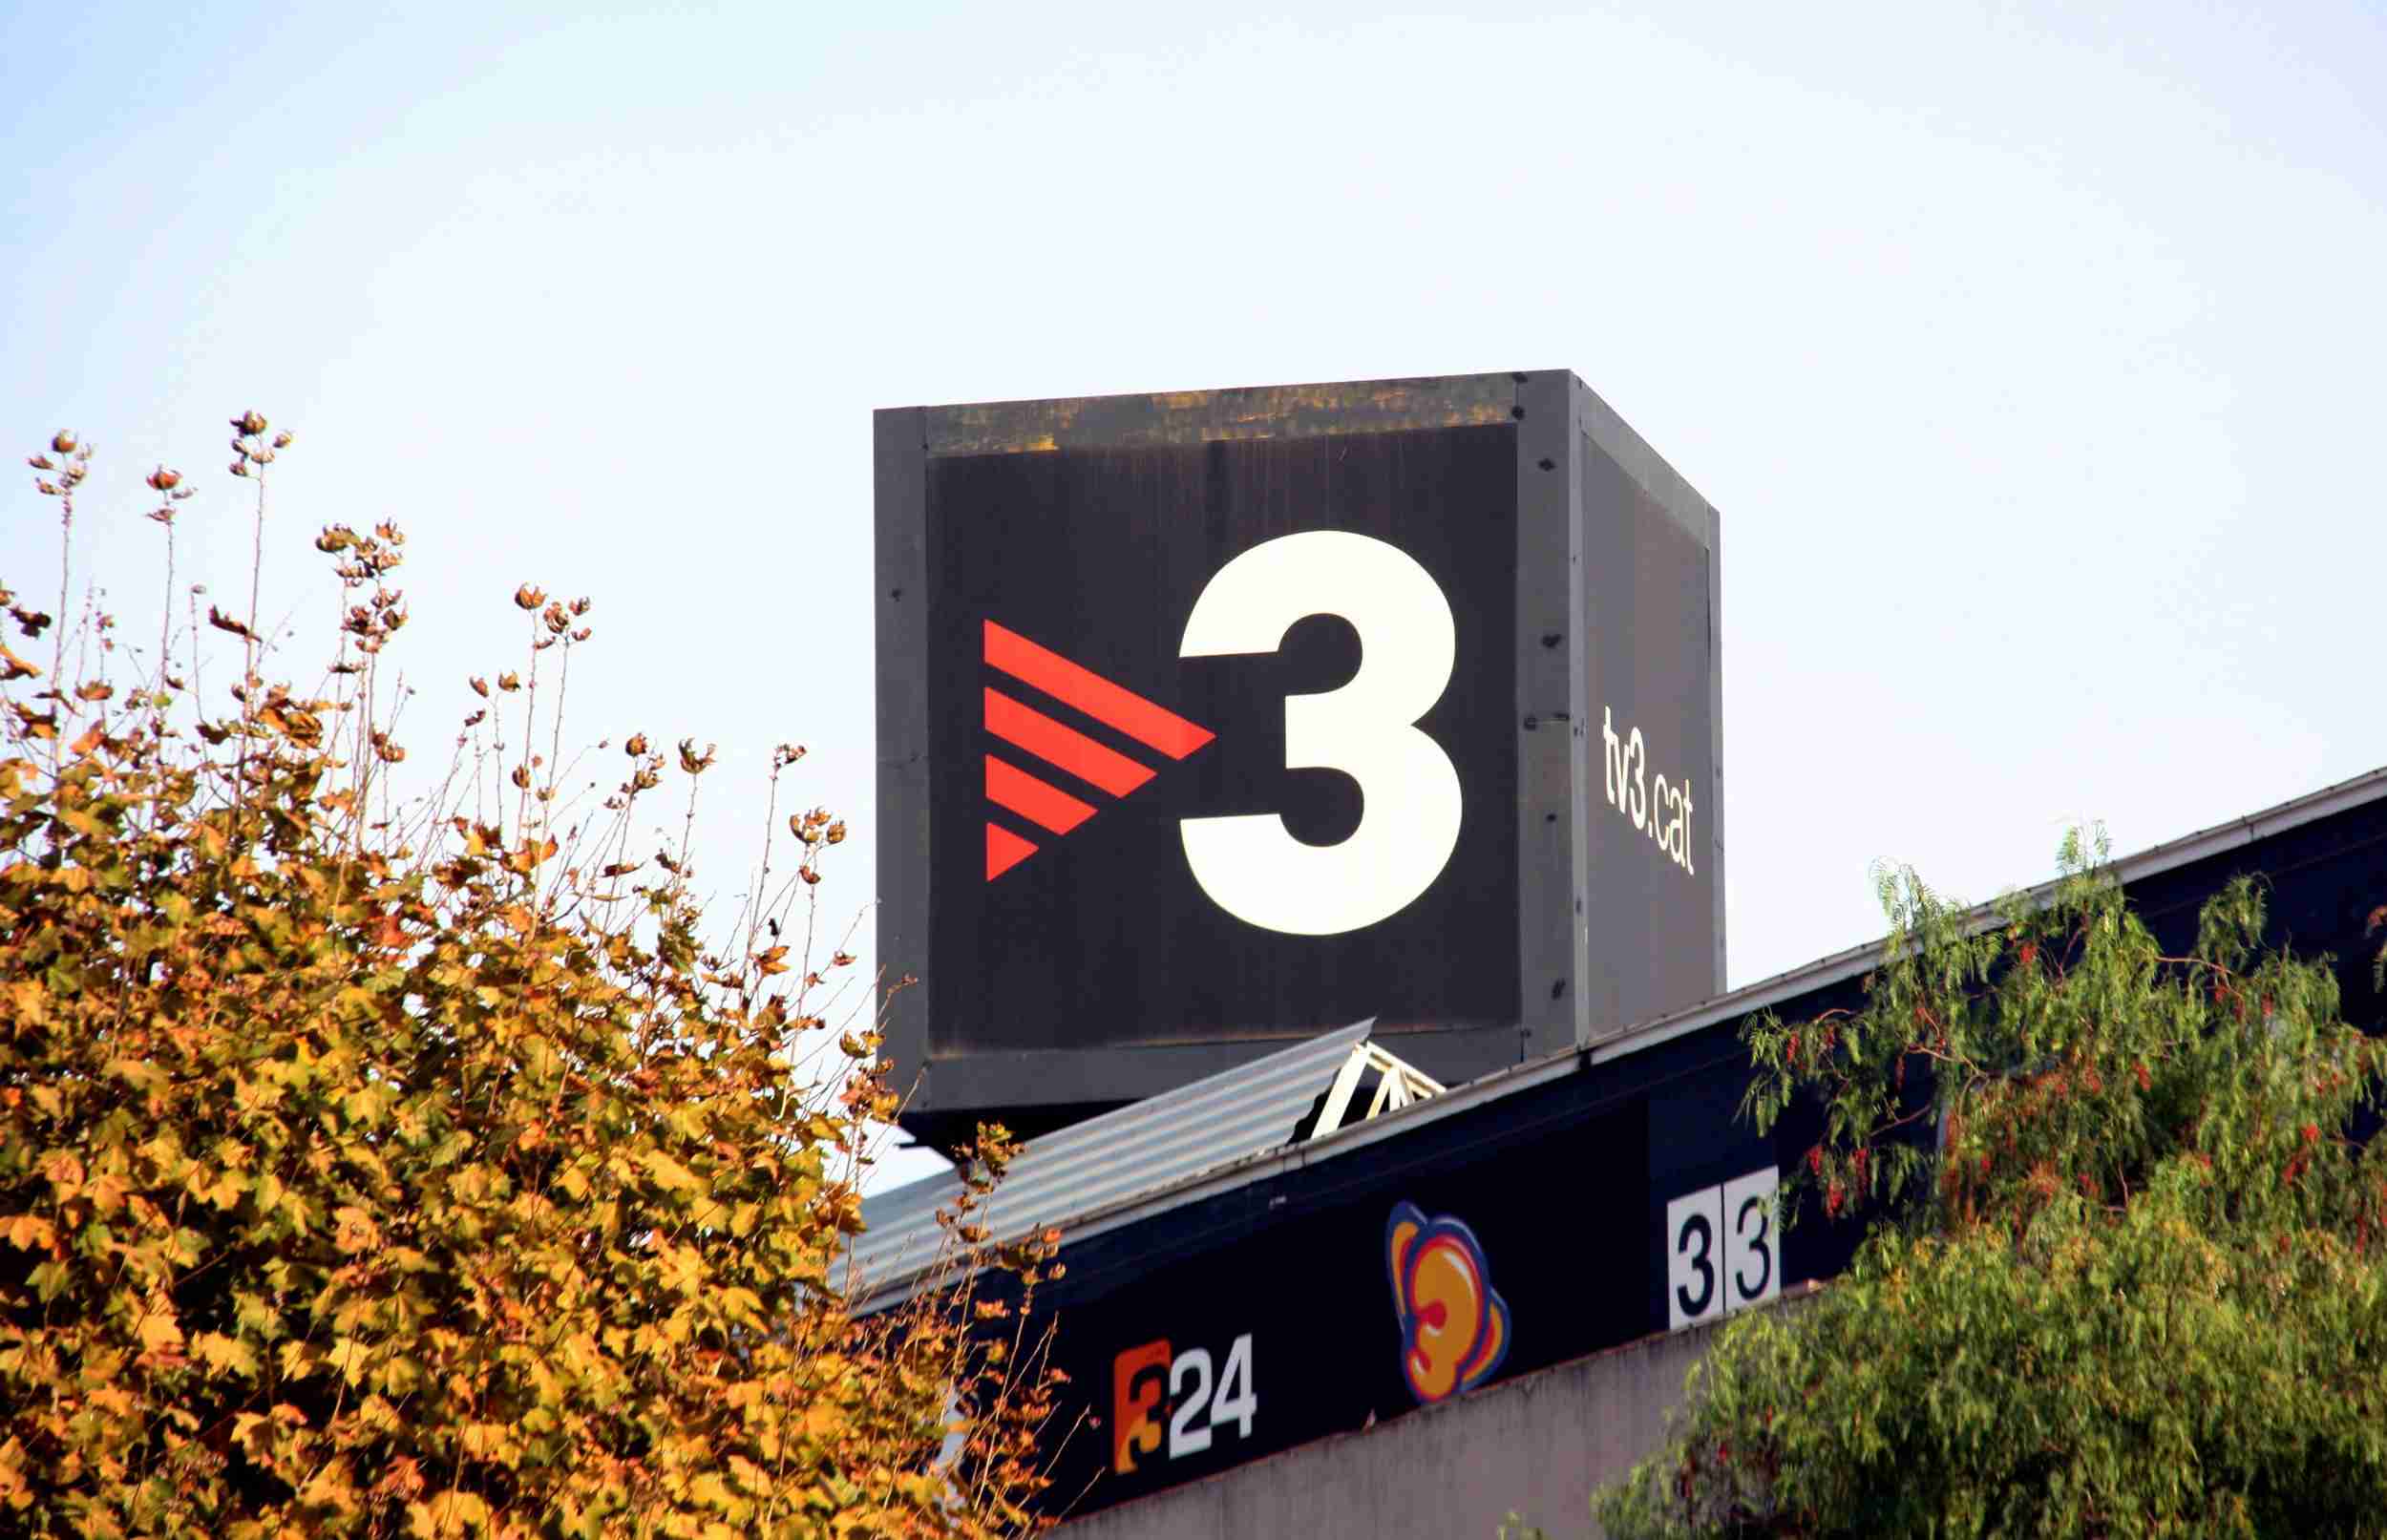 Catalonia's TV3 was the most balanced in its talk shows, says regulator